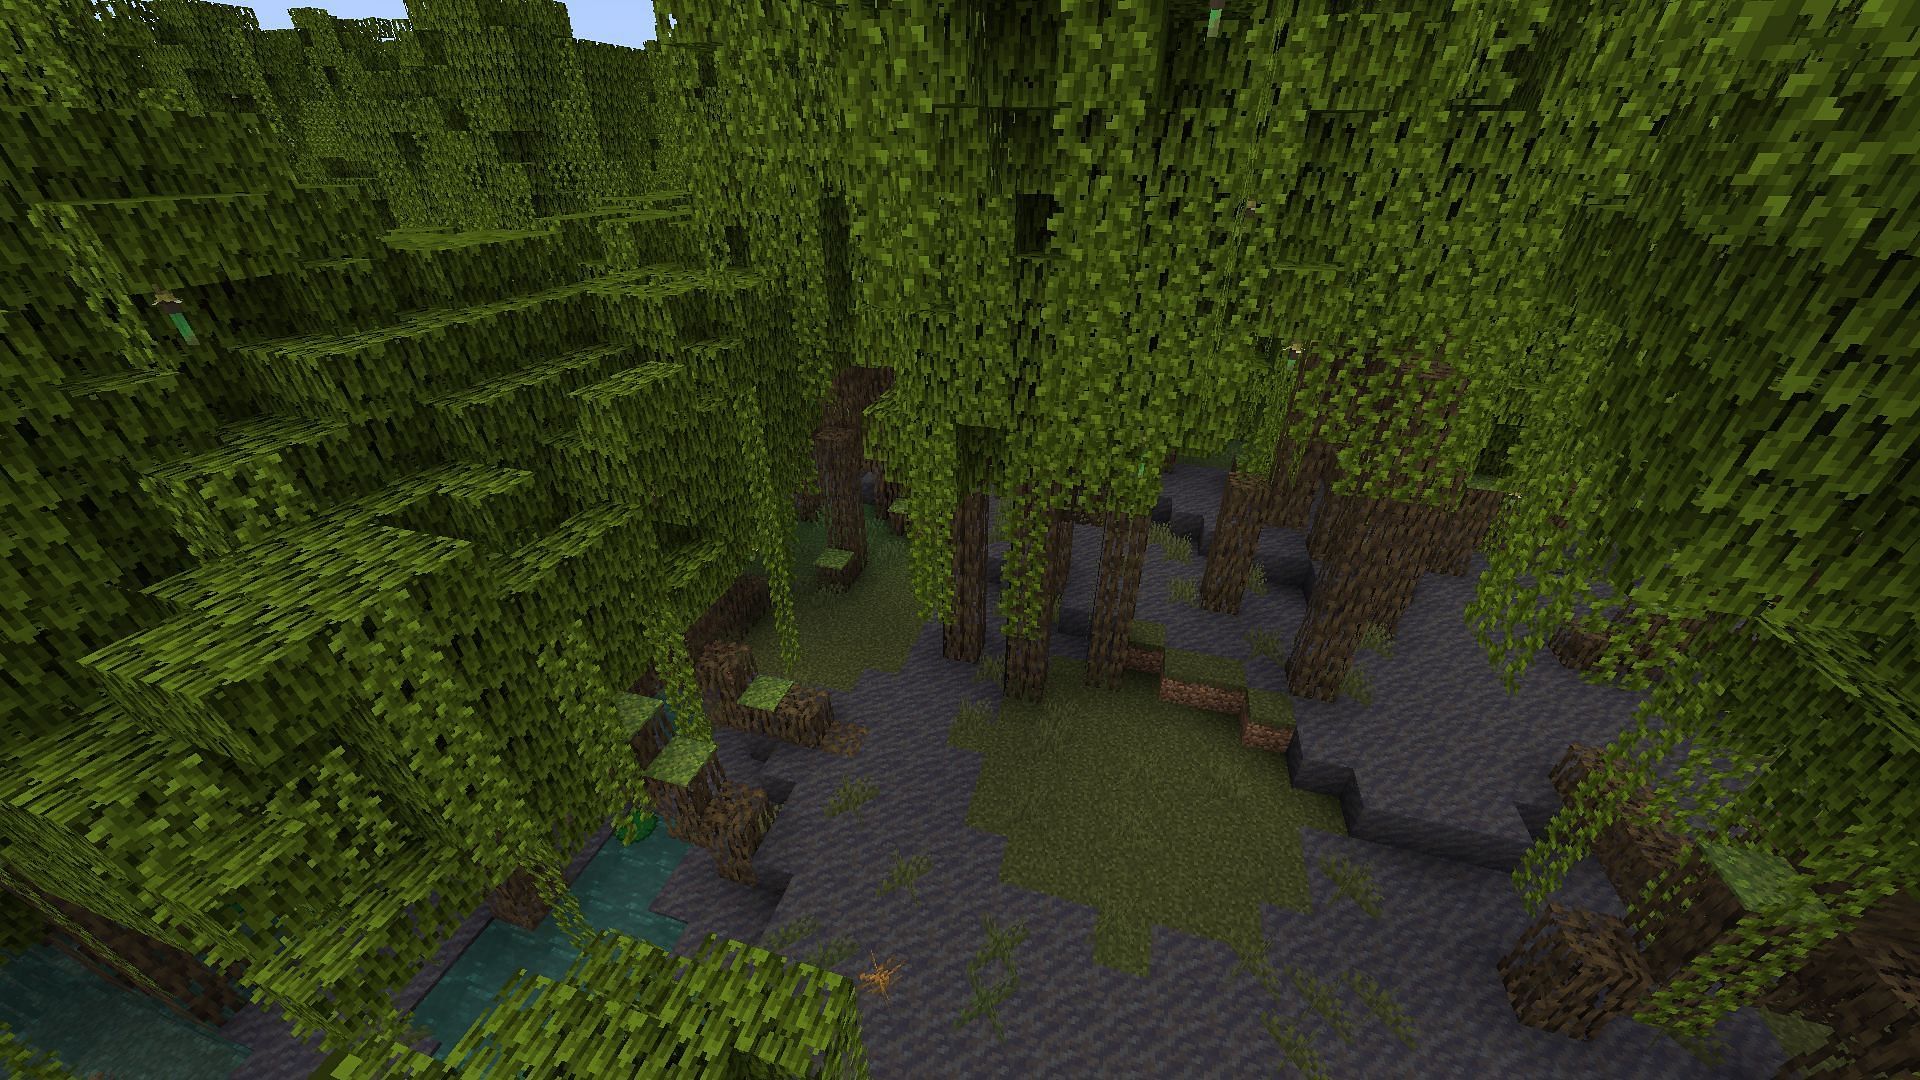 Players will directly spawn inside Mangrove Swamp in Minecraft (Image via Mojang)